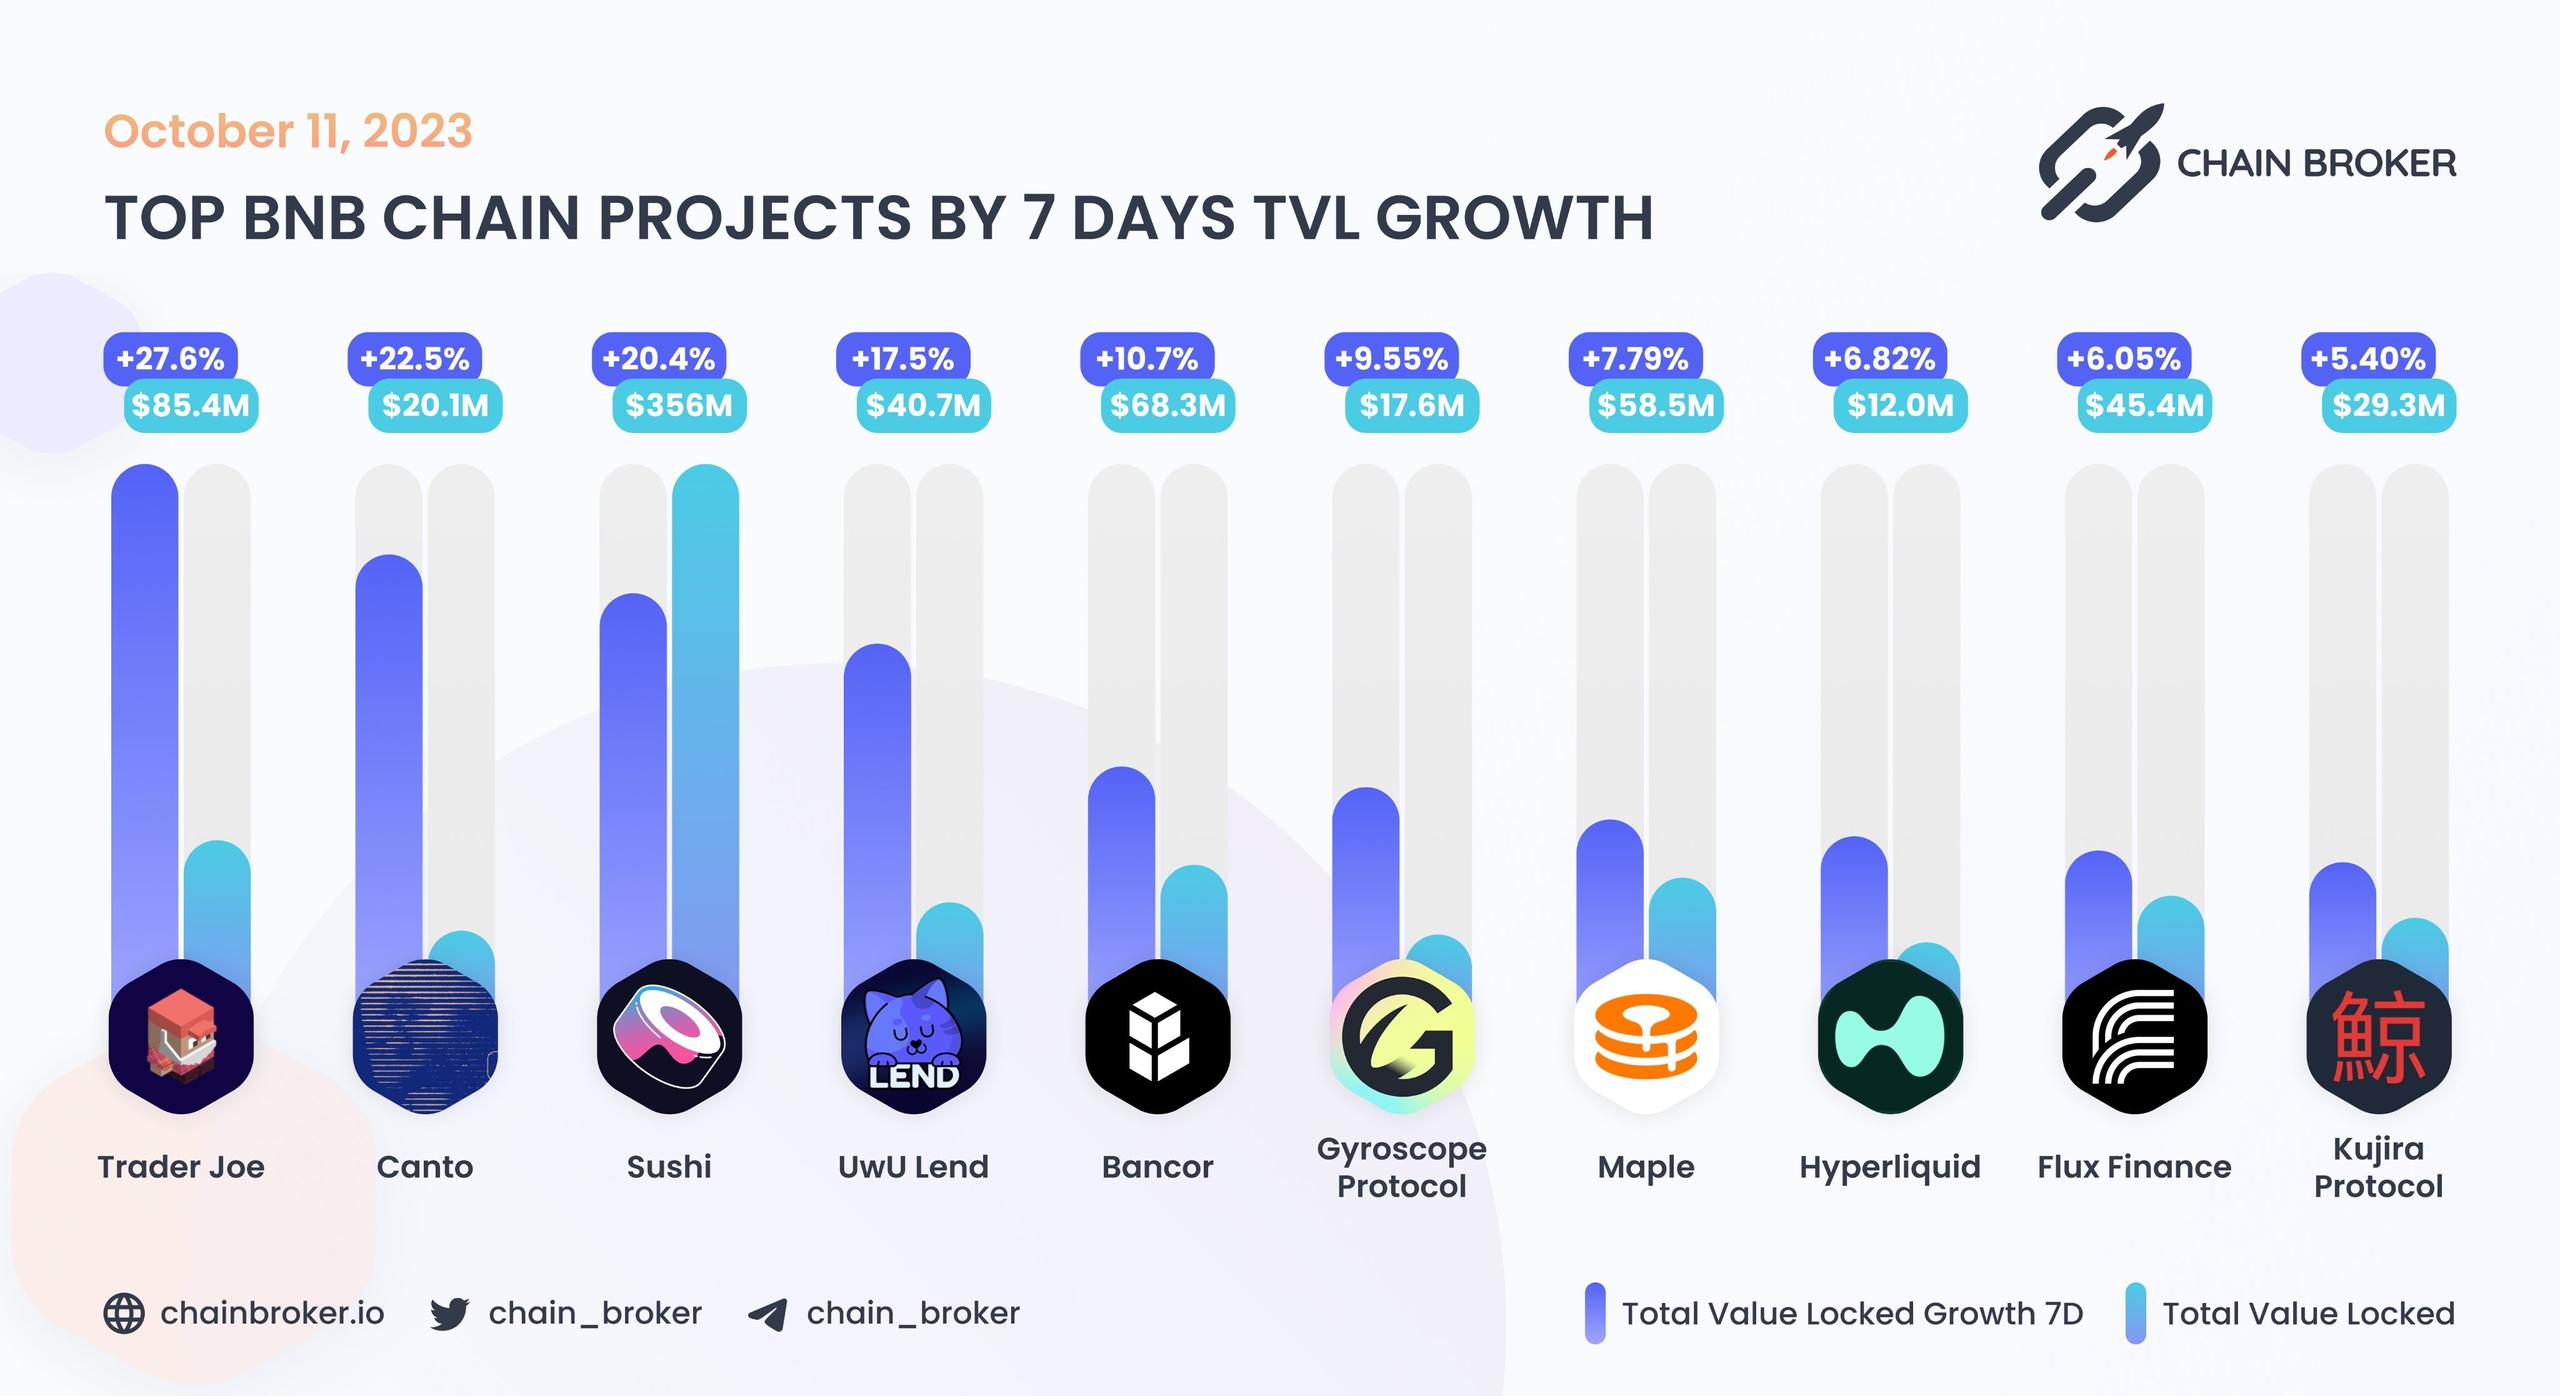 Top BNB Chain projects ranged by 7D TVL growth